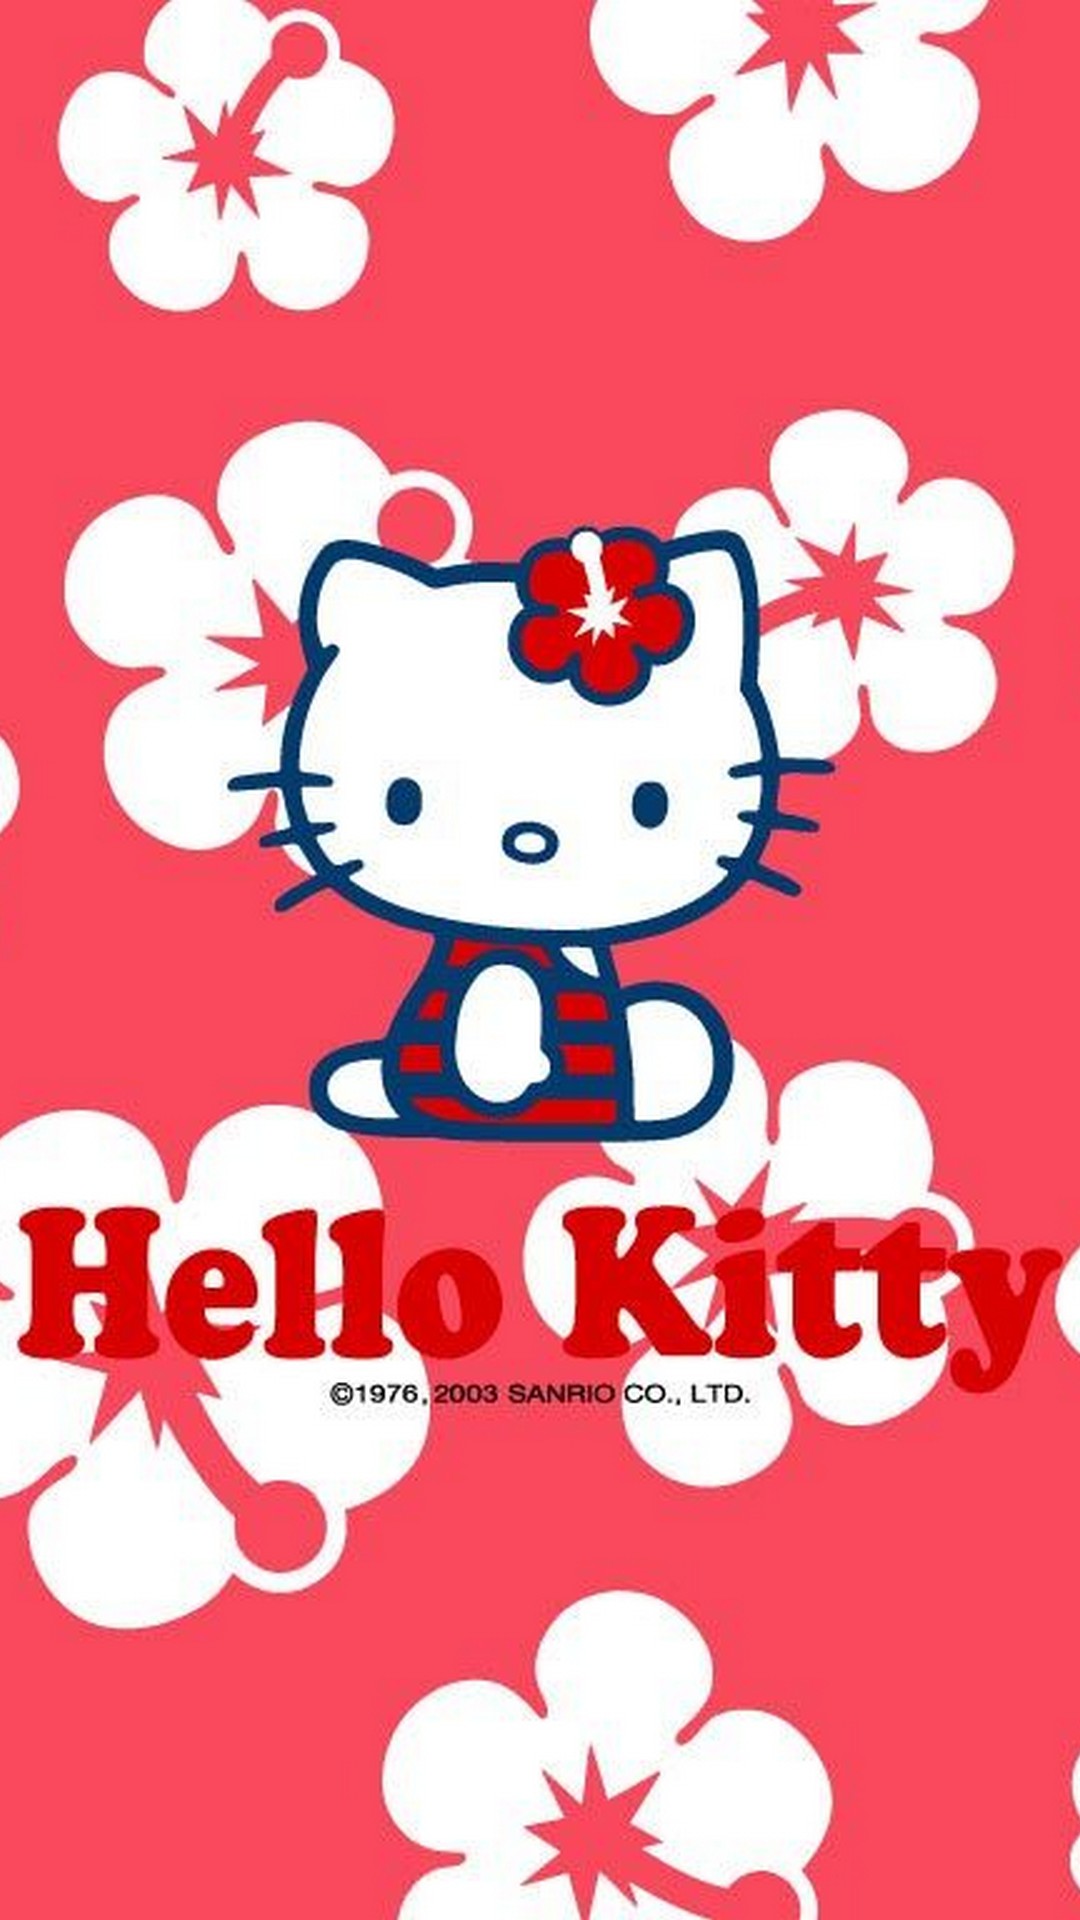 Android Wallpaper Hello Kitty with image resolution 1080x1920 pixel. You can make this wallpaper for your Android backgrounds, Tablet, Smartphones Screensavers and Mobile Phone Lock Screen